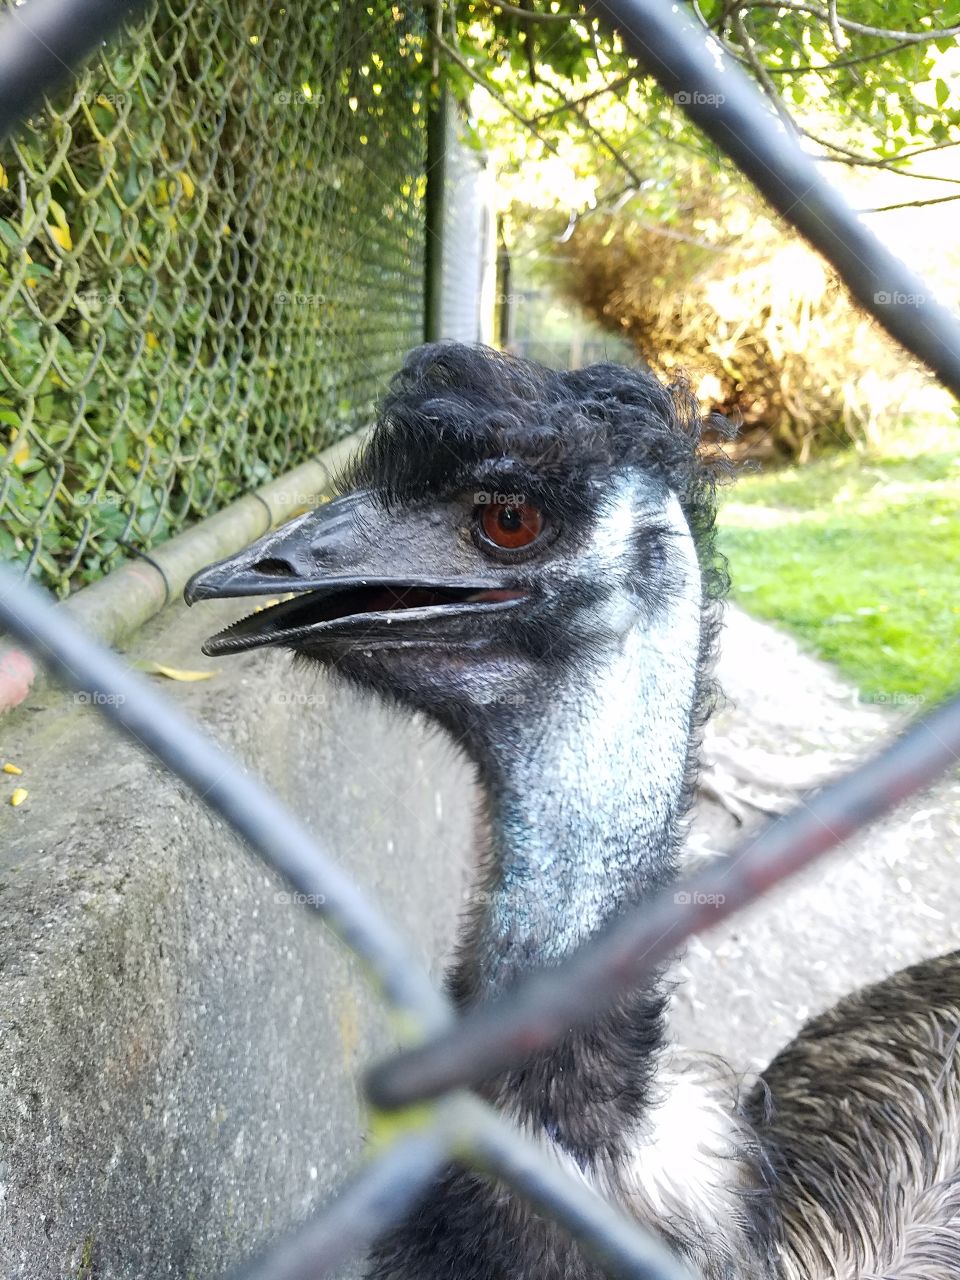 Profile of an emu at the Woodland Park Zoo in Seattle